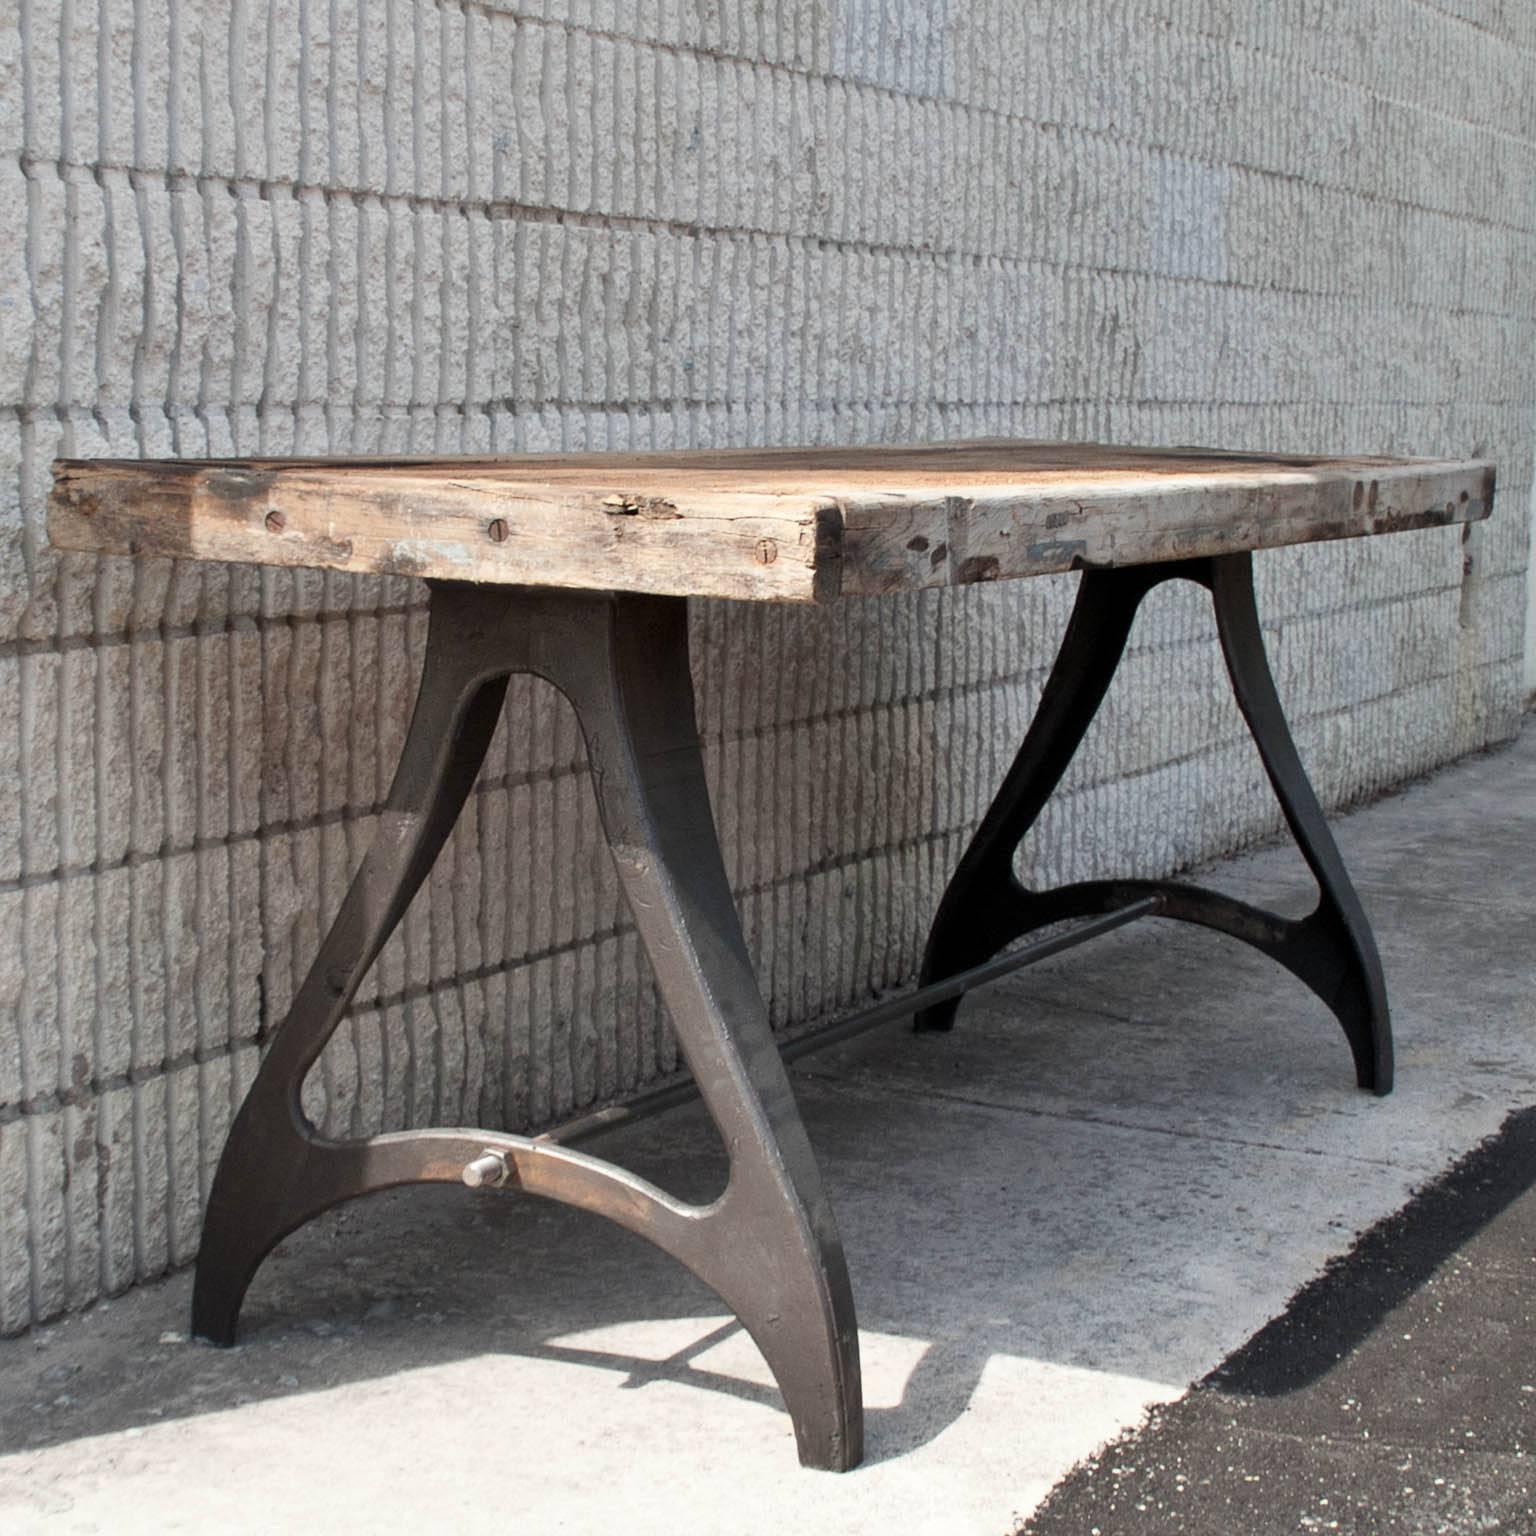 20th century Industrial Design from Paris, France, circa 1930.
Heavy cast iron base with French oak wooden top.
In Used-Aged-Clean condition.
 